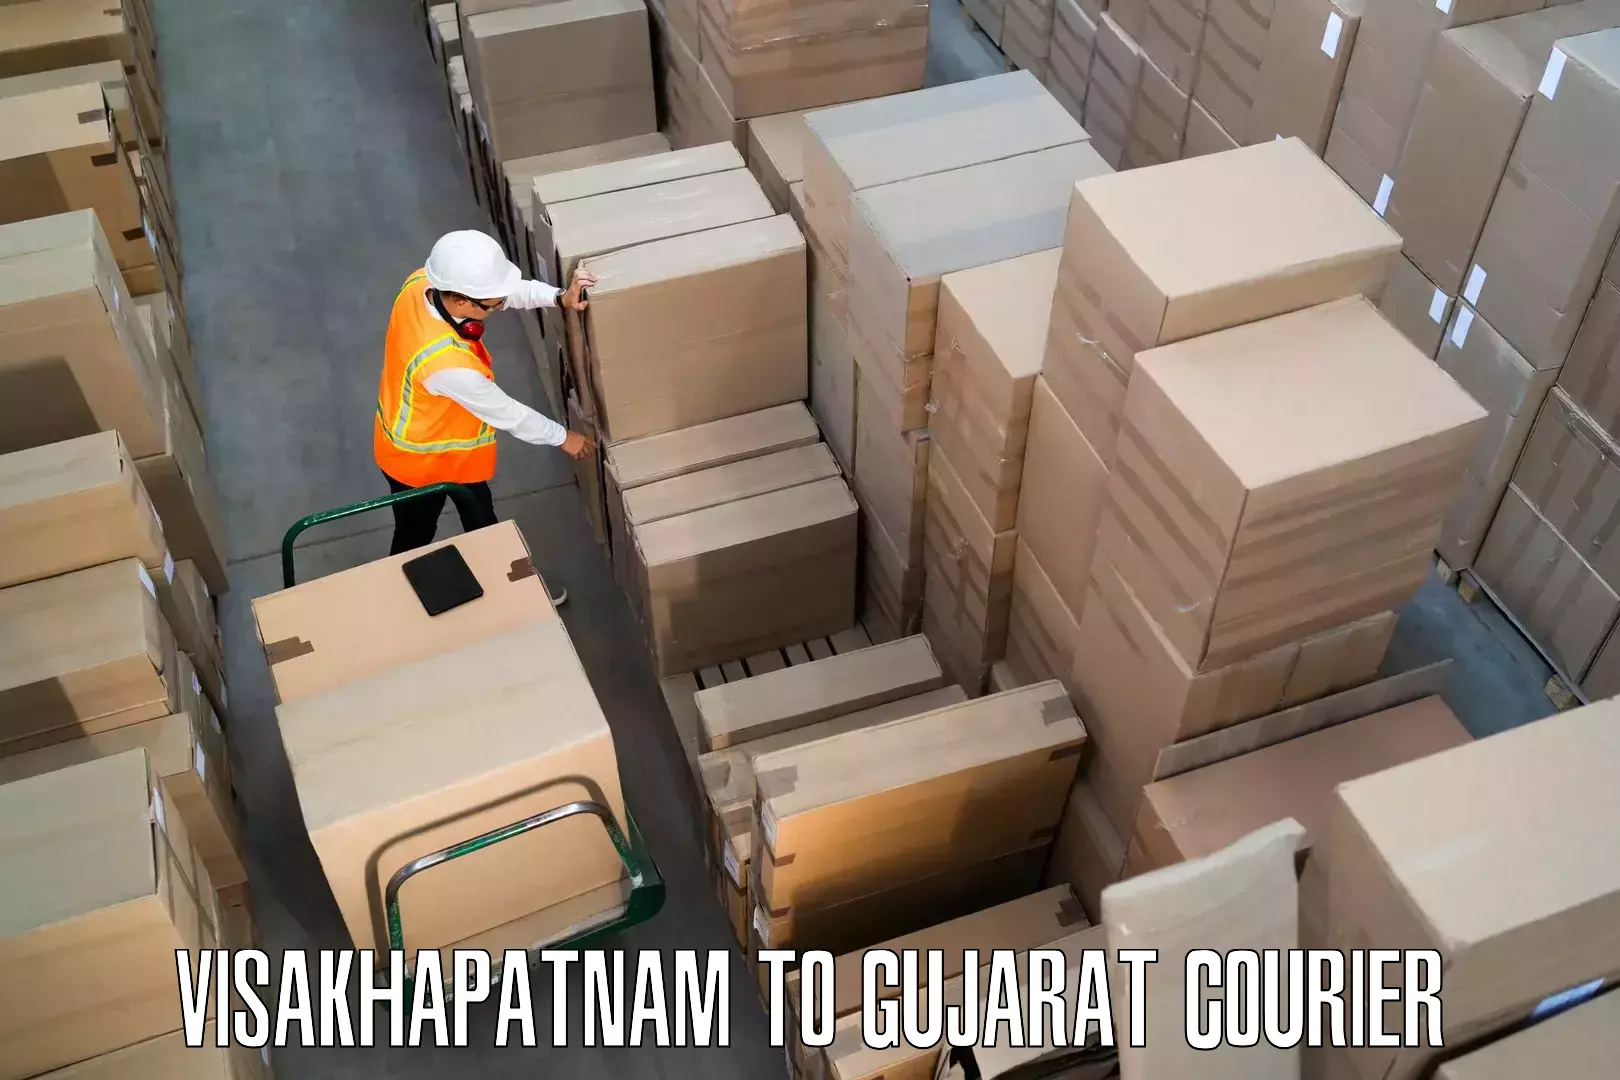 Furniture delivery service Visakhapatnam to Dhasa